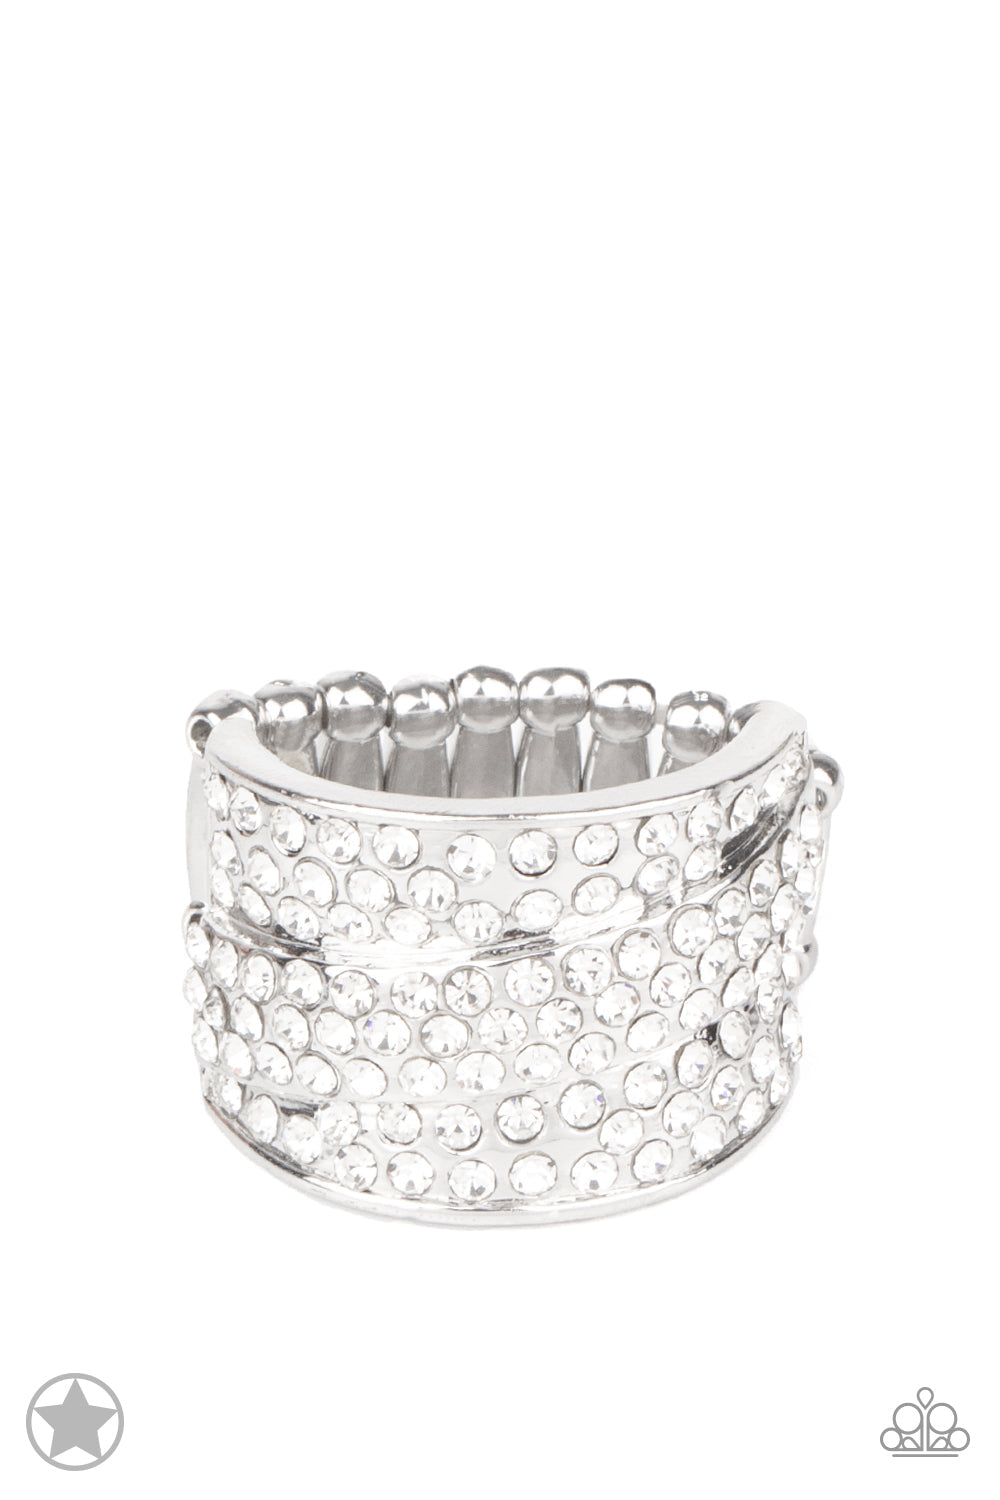 The Millionaires Club - White and Silver Fashion Ring - Paparazzi Accessories - Row upon row of glistening white rhinestones stack into an incandescent display. An additional row of sparkling rhinestones wraps diagonally across the band for an extra splash of refined shimmer. Features a stretchy band for a flexible fit. Sold as one individual ring.